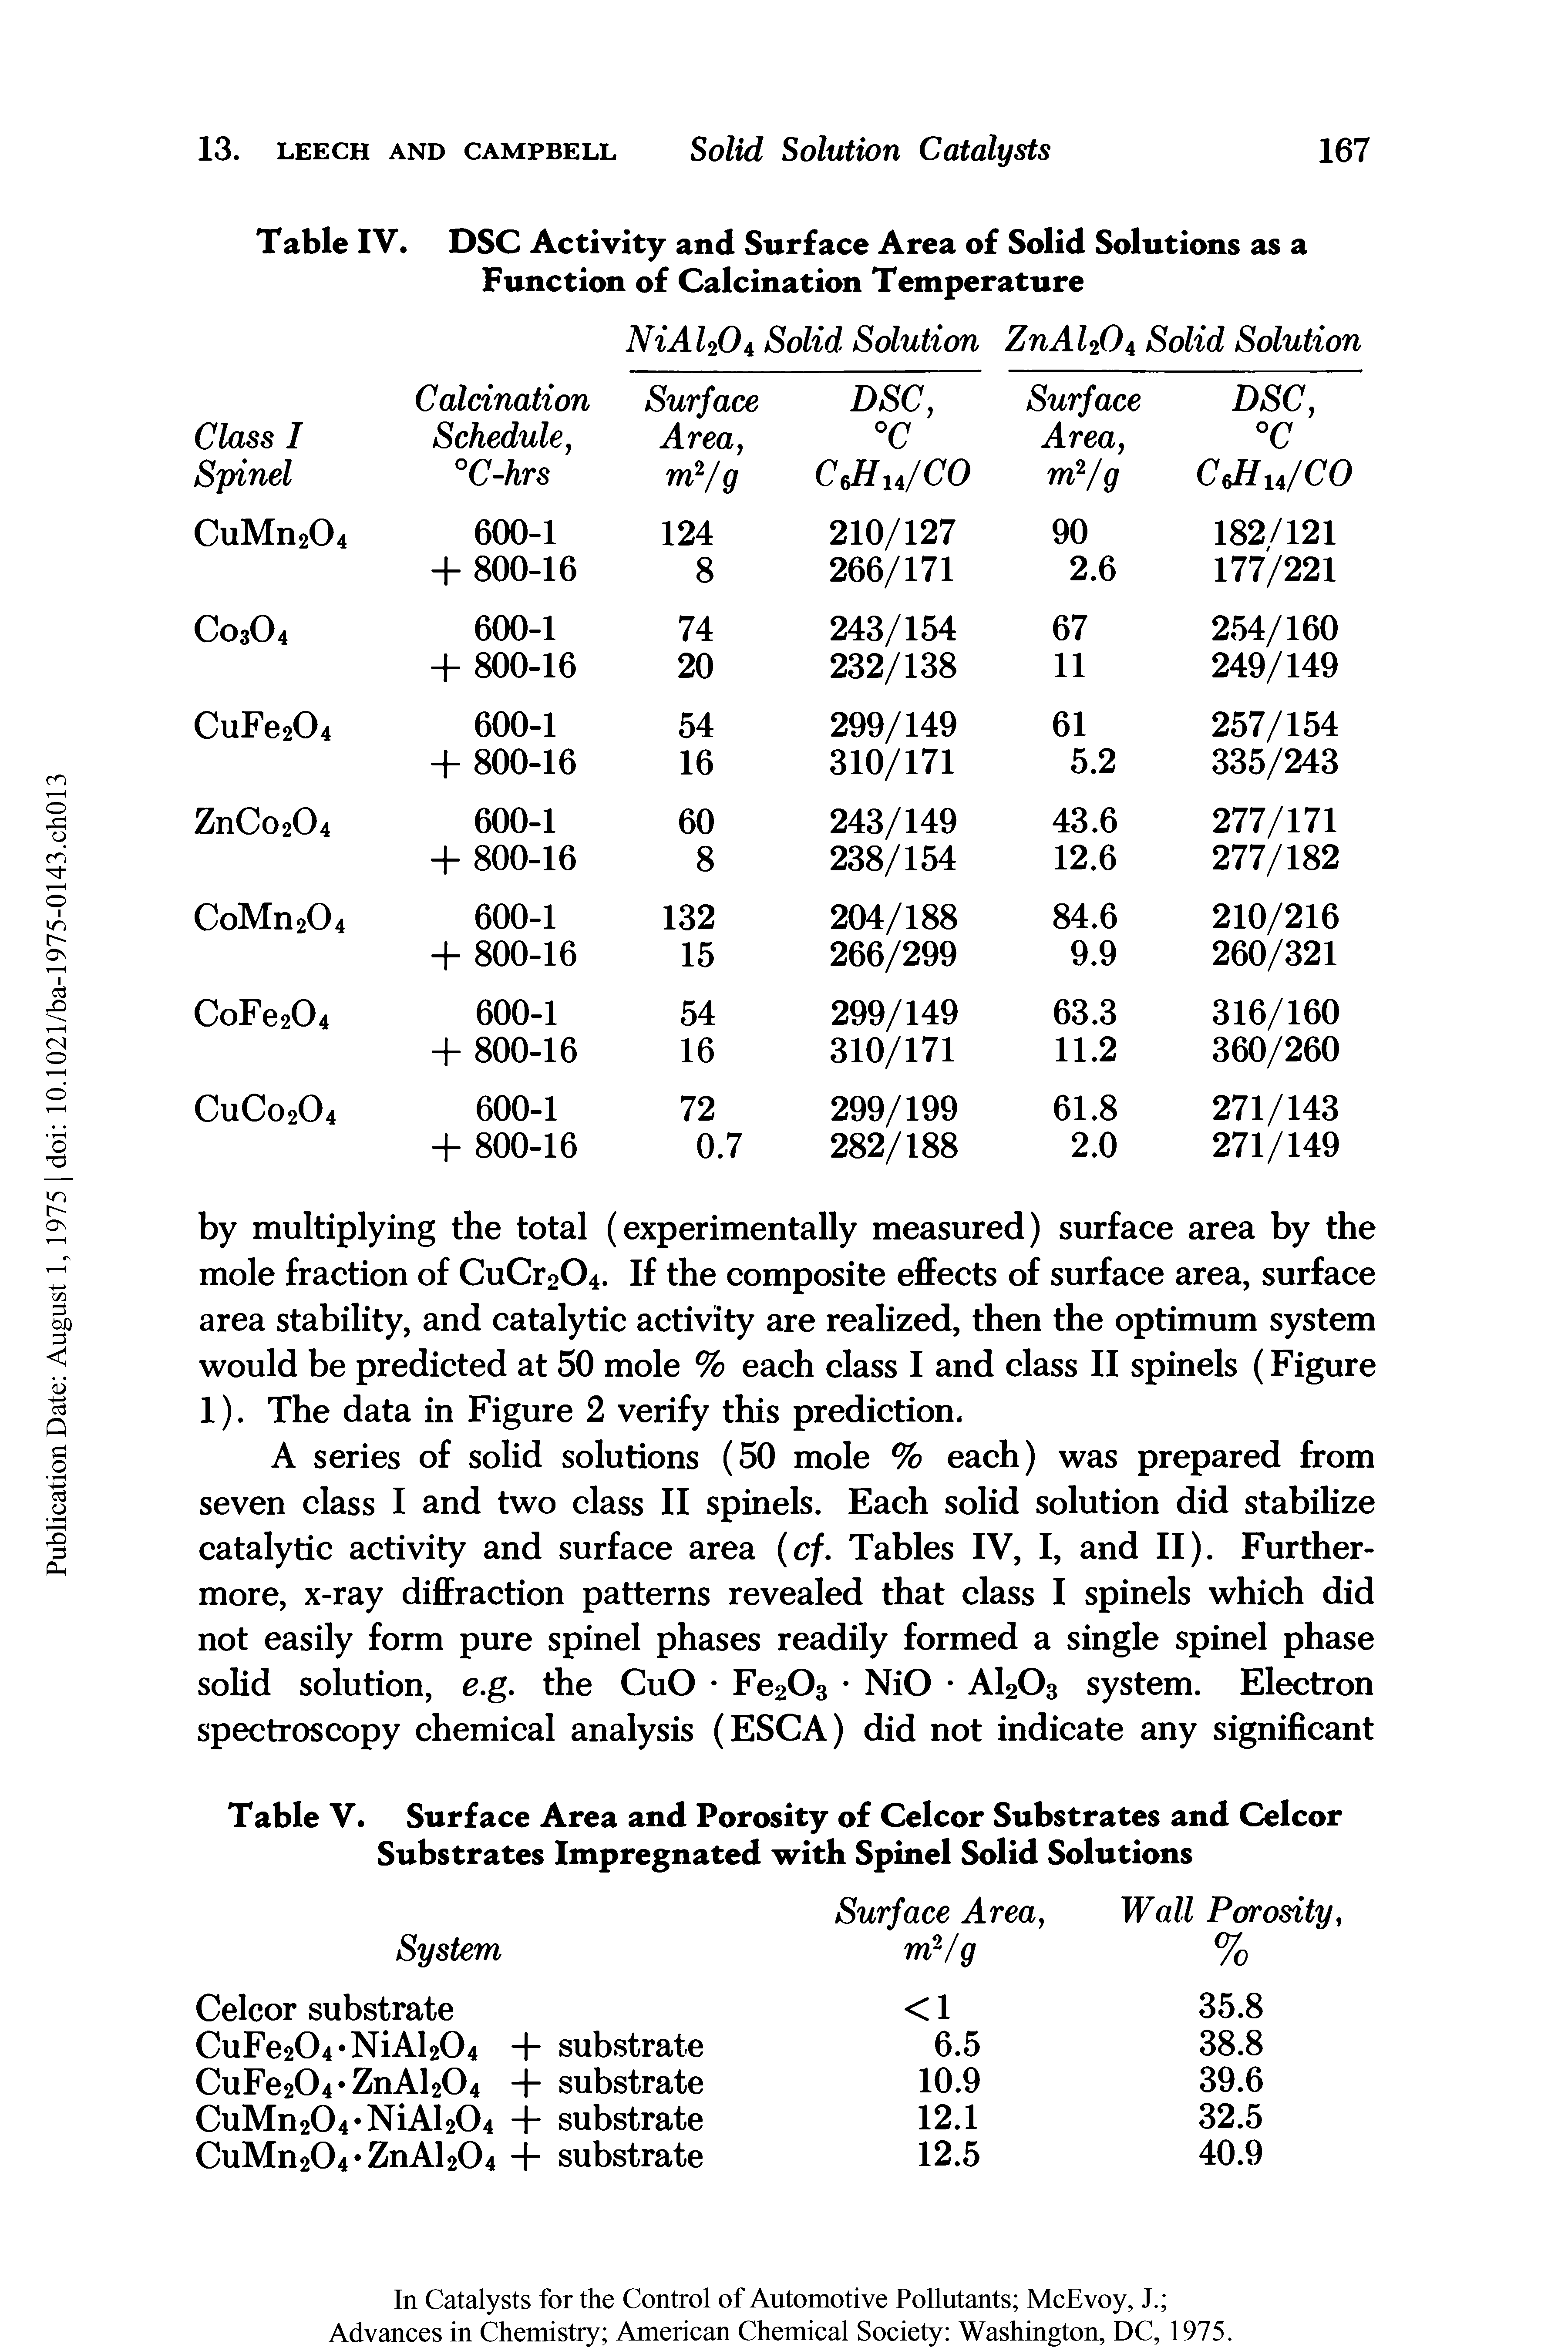 Table V. Surface Area and Porosity of Celcor Substrates and Celcor Substrates Impregnated with Spinel Solid Solutions...